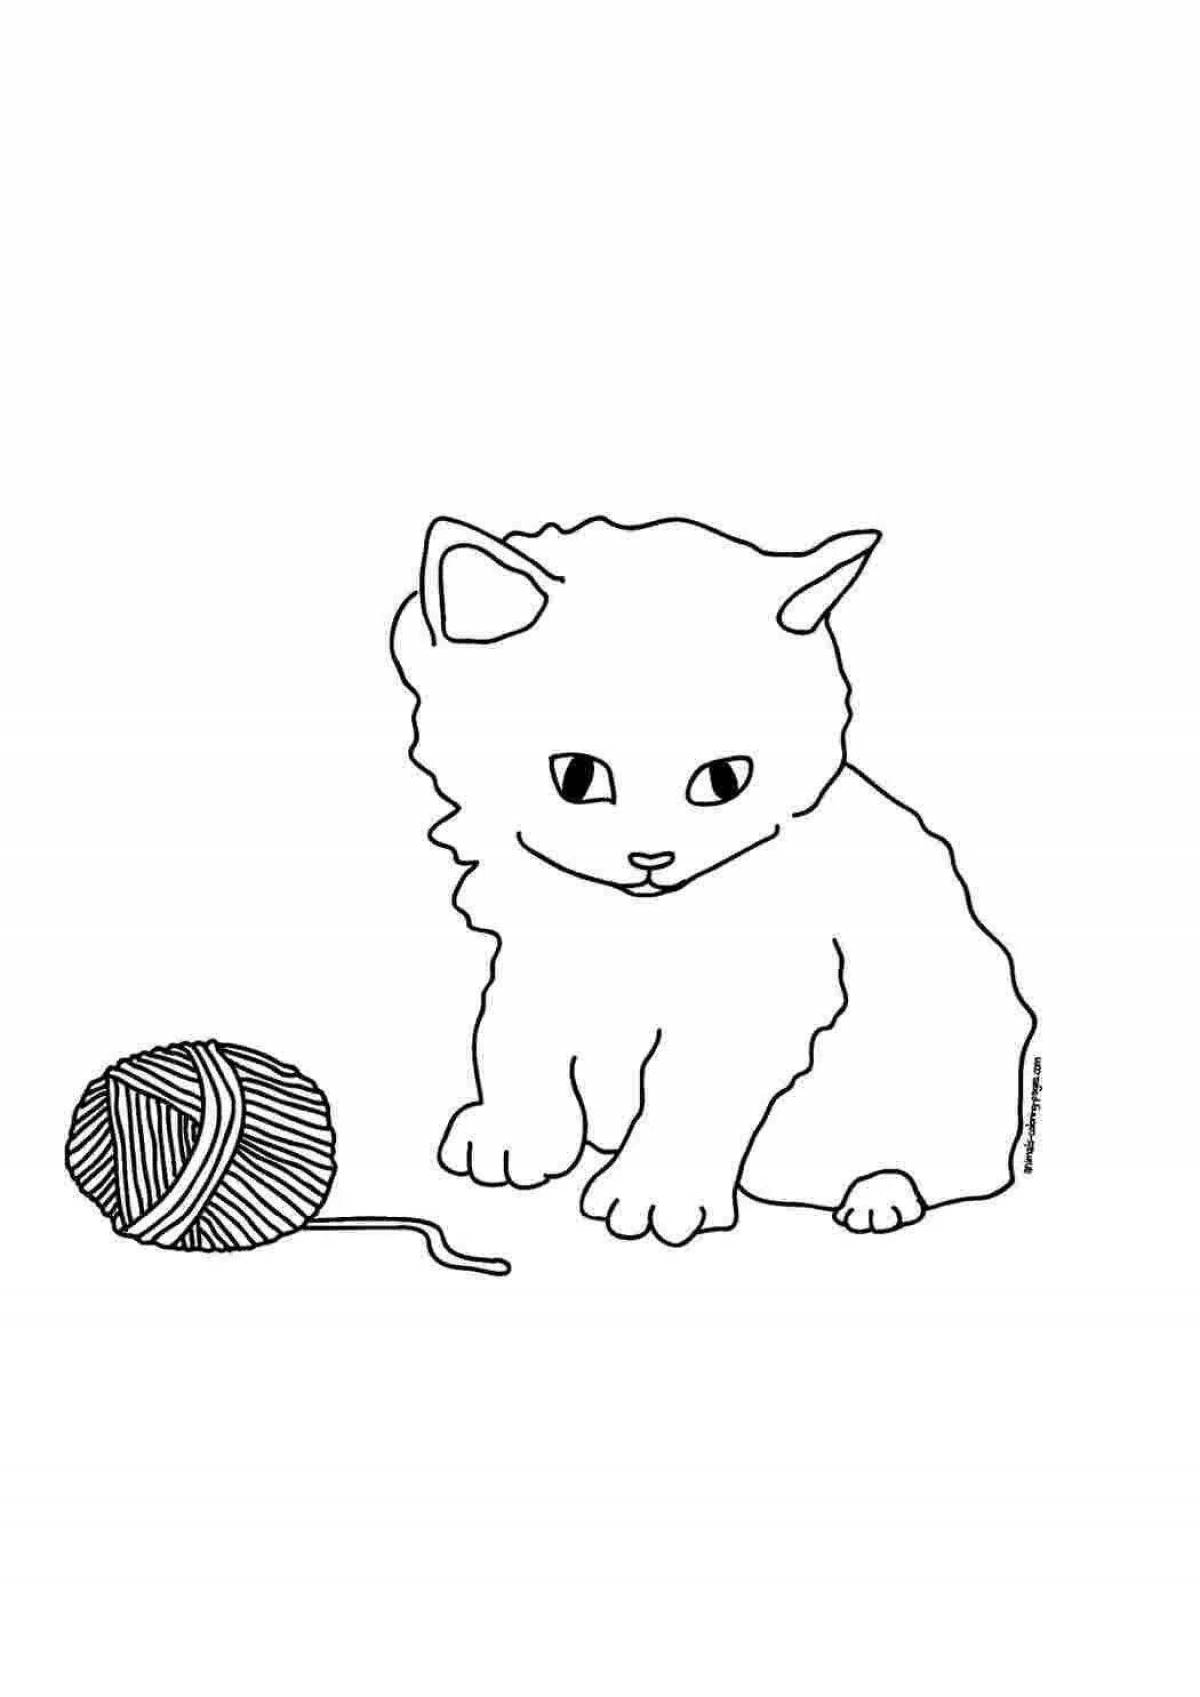 Coloring page adorable kitten with a ball